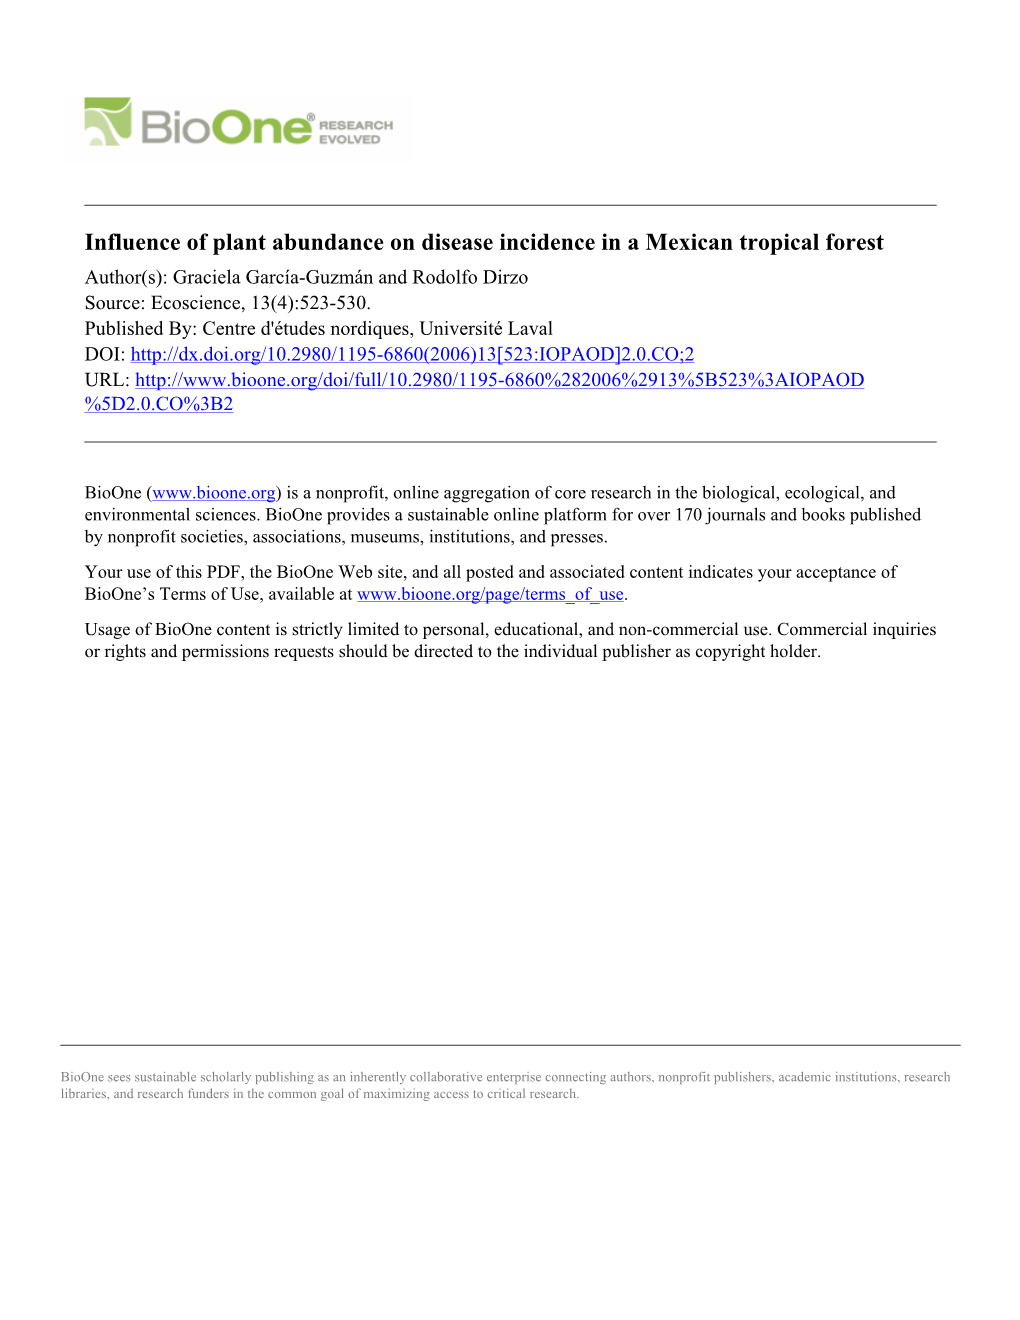 Influence of Plant Abundance on Disease Incidence in a Mexican Tropical Forest Author(S): Graciela García-Guzmán and Rodolfo Dirzo Source: Ecoscience, 13(4):523-530